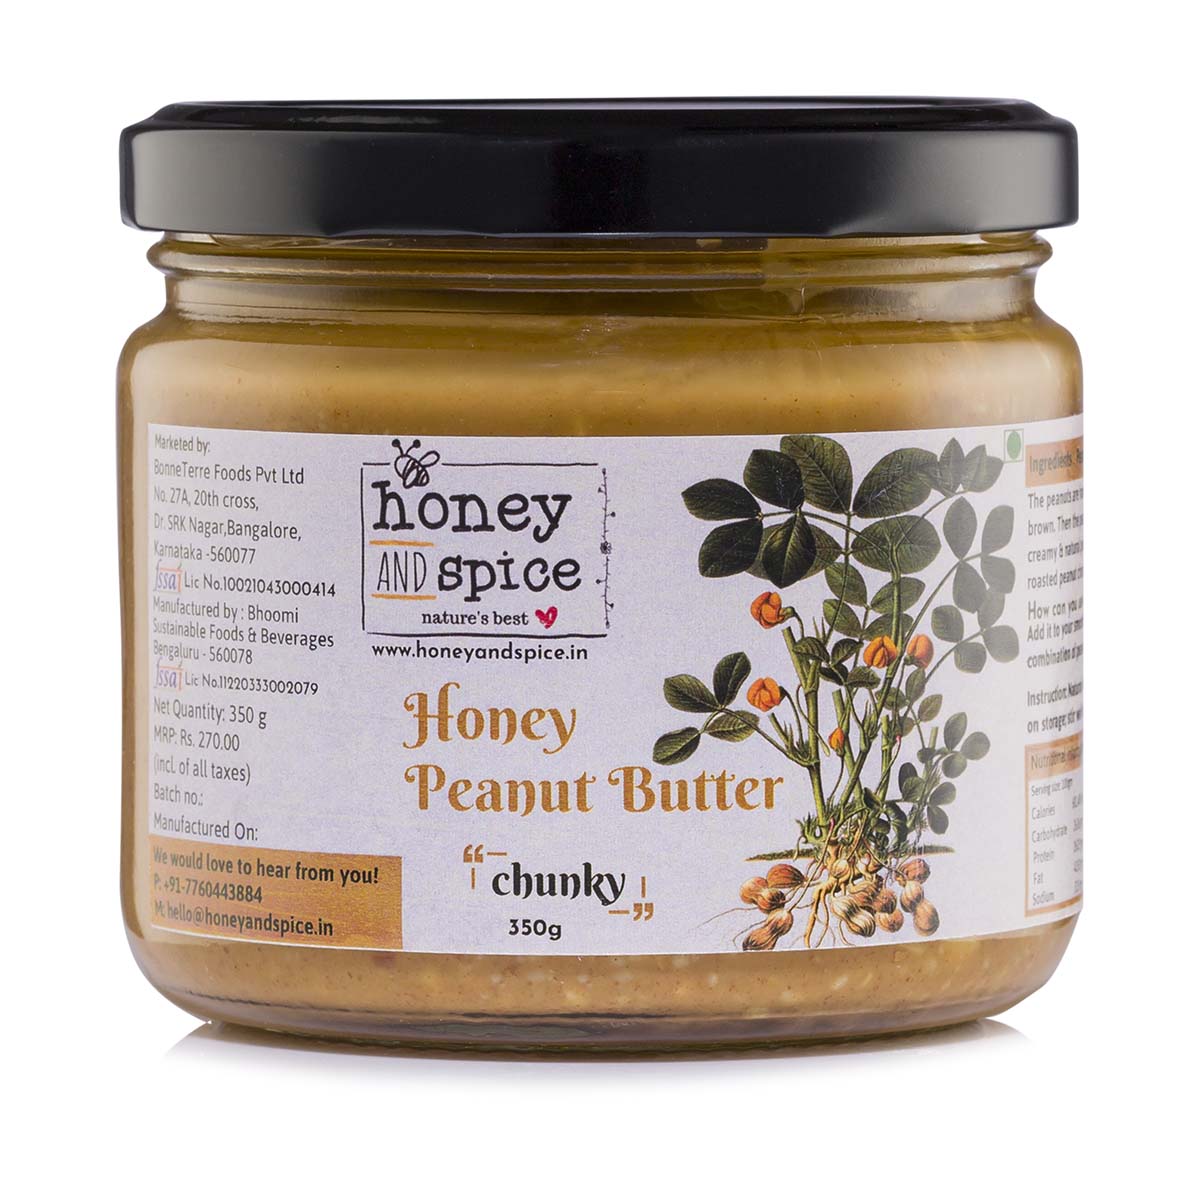 Product: Honey and Spice Peanut Butter Chunky